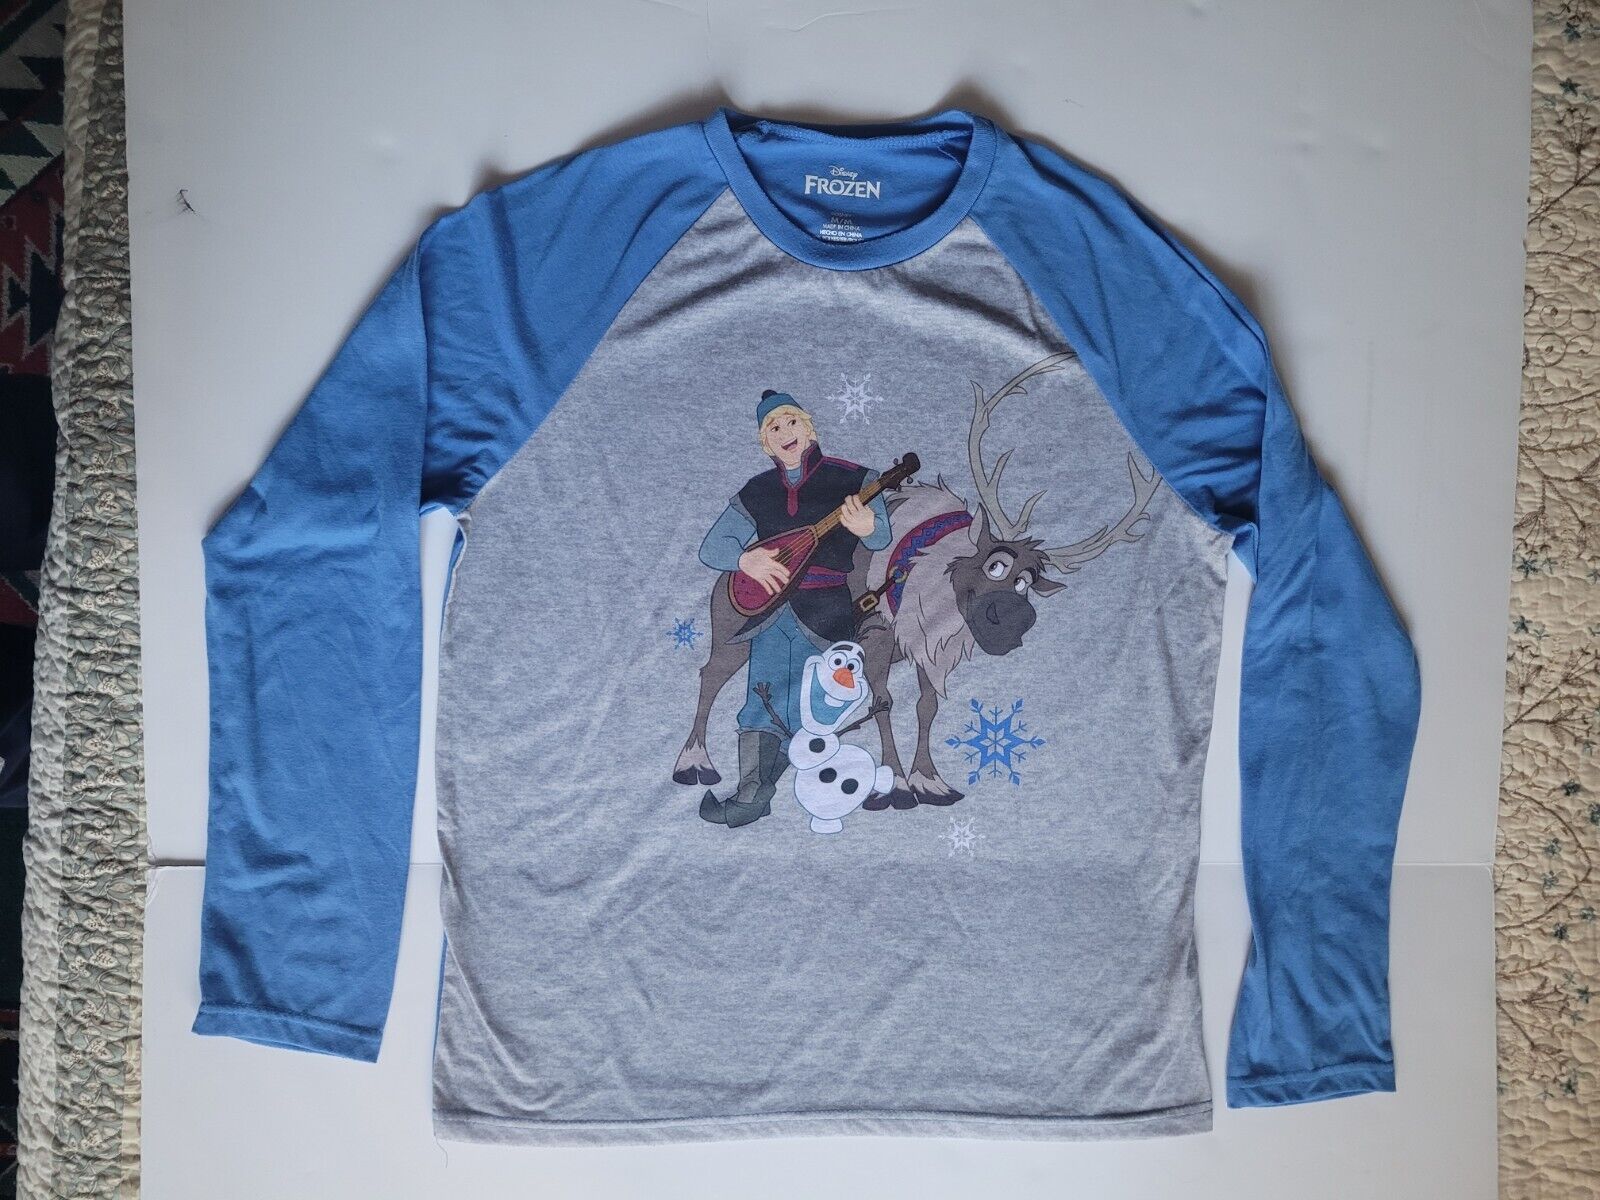 Disney Vintage Frozen Characters Long Sleeve T-shirt Medium Blue With Gray